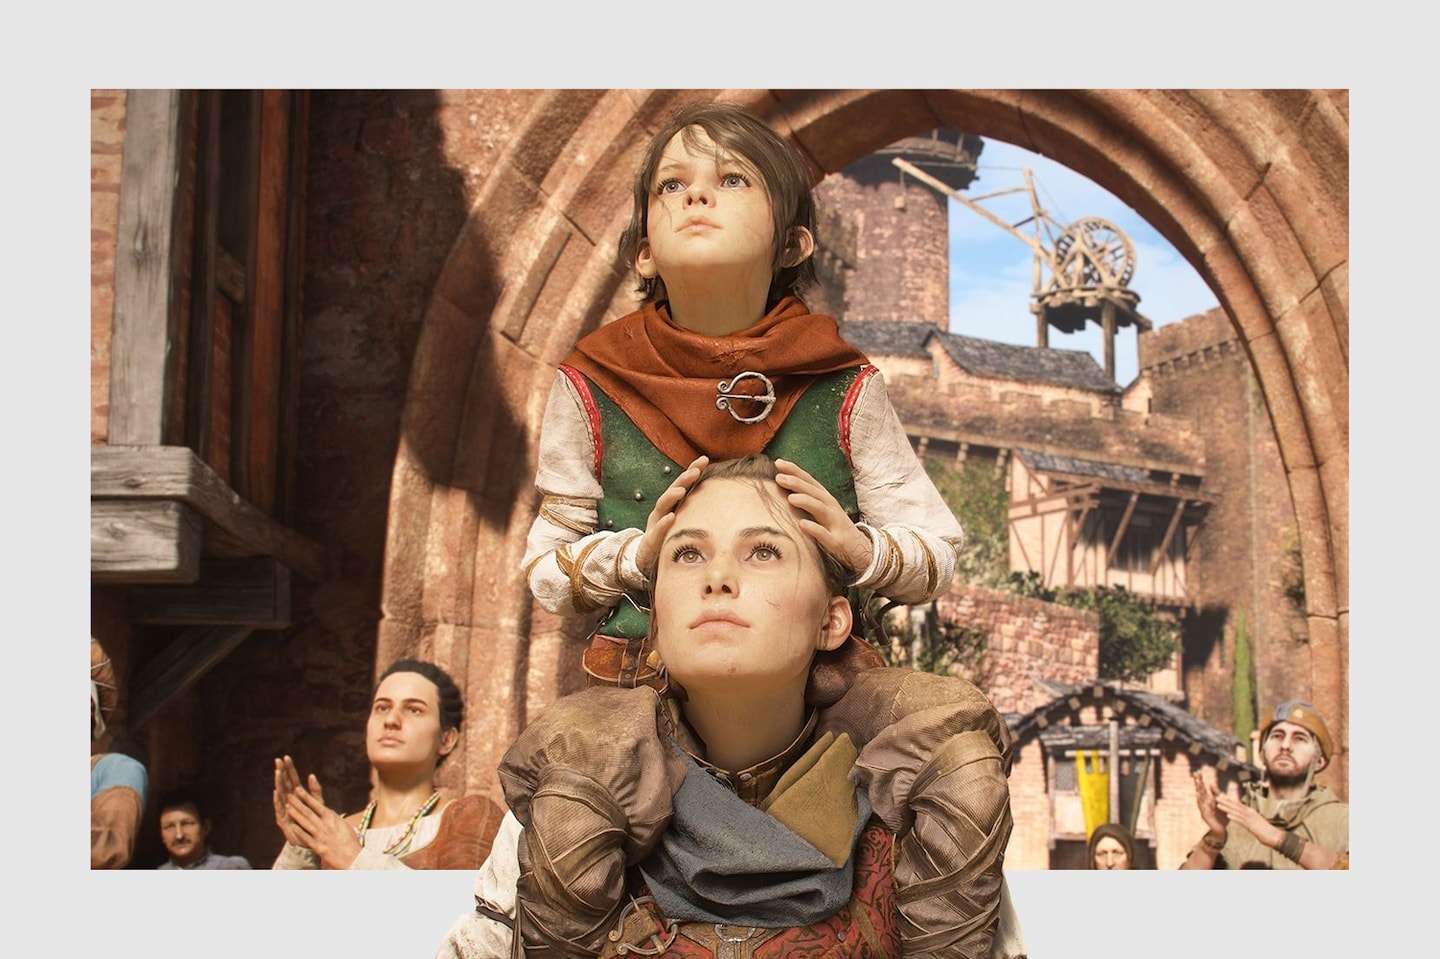 ‘A Plague Tale: Requiem’ conjures hope amid the cruelty of a pandemic